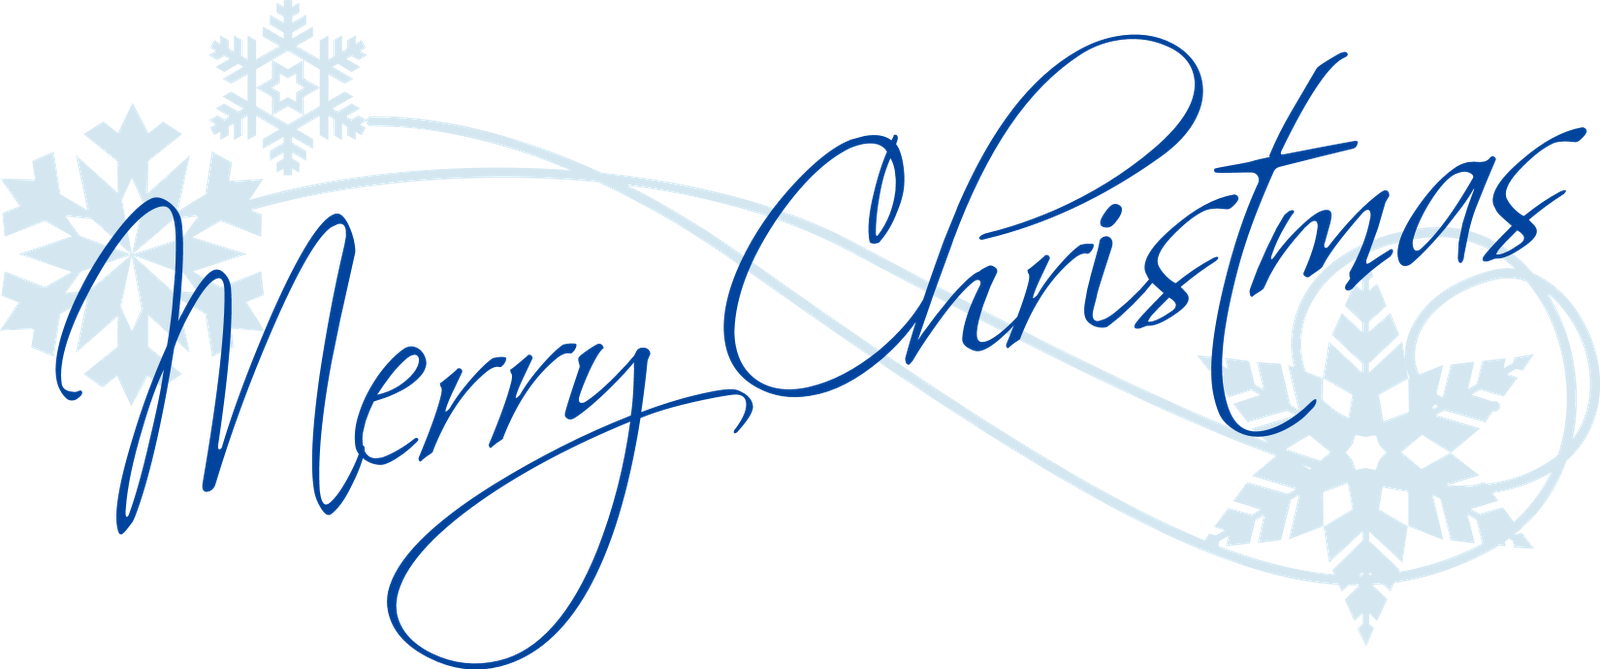 Merry Christmas Word Art Transparent PNG